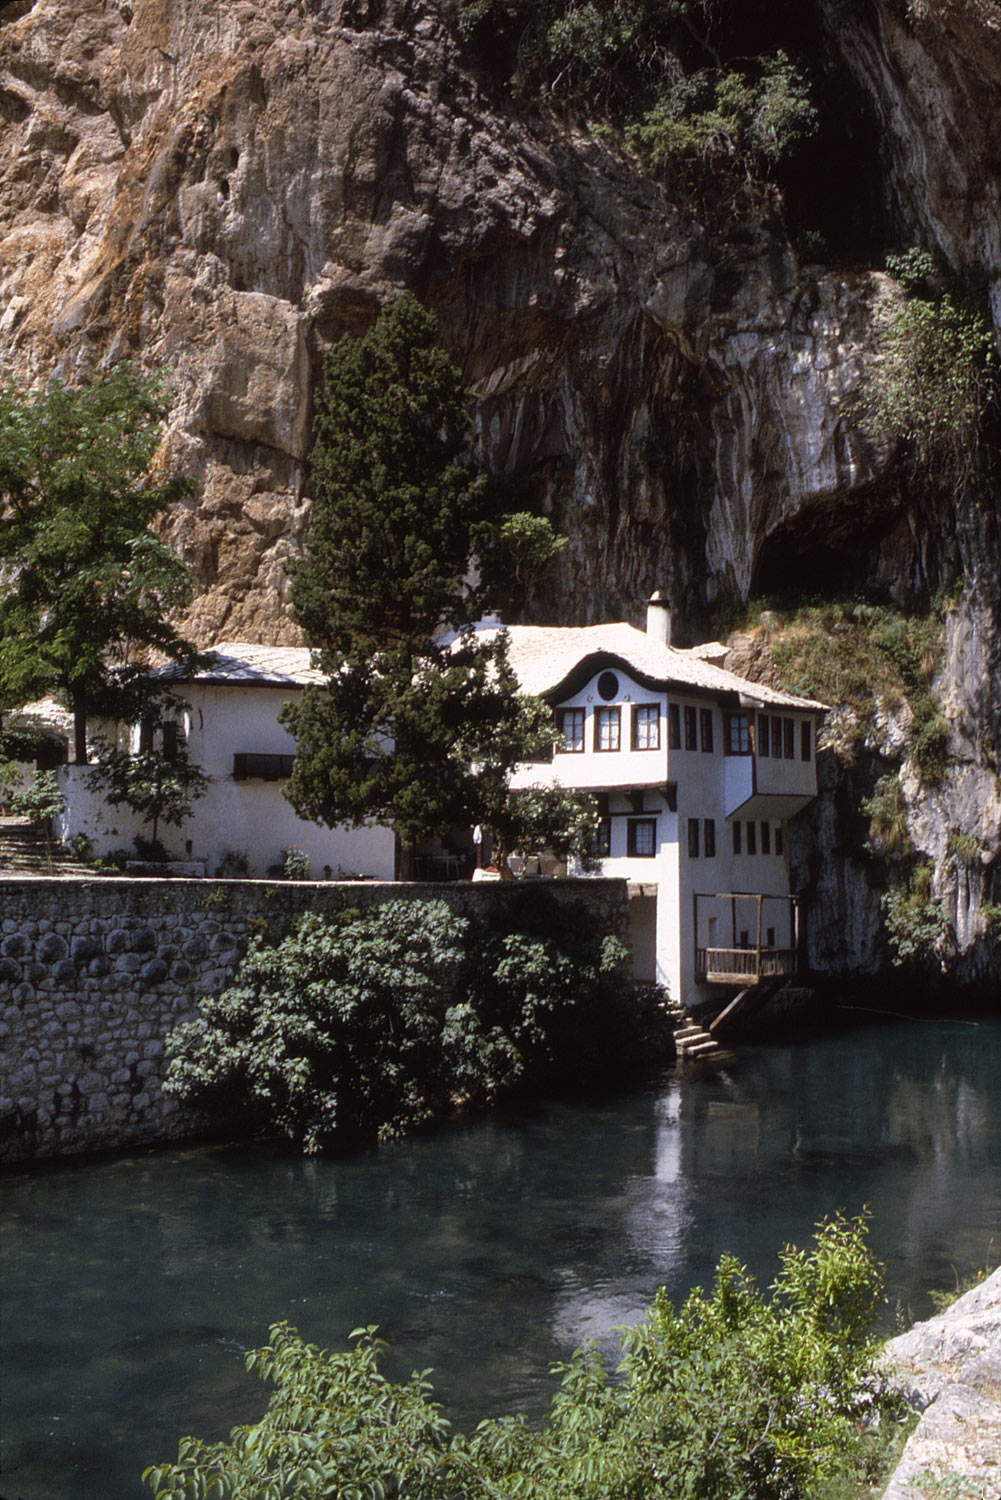 Blagaj Tekija - <p>The tekija seen situated on the shore of the Buna River, at the base of the massive karst stone formation</p>